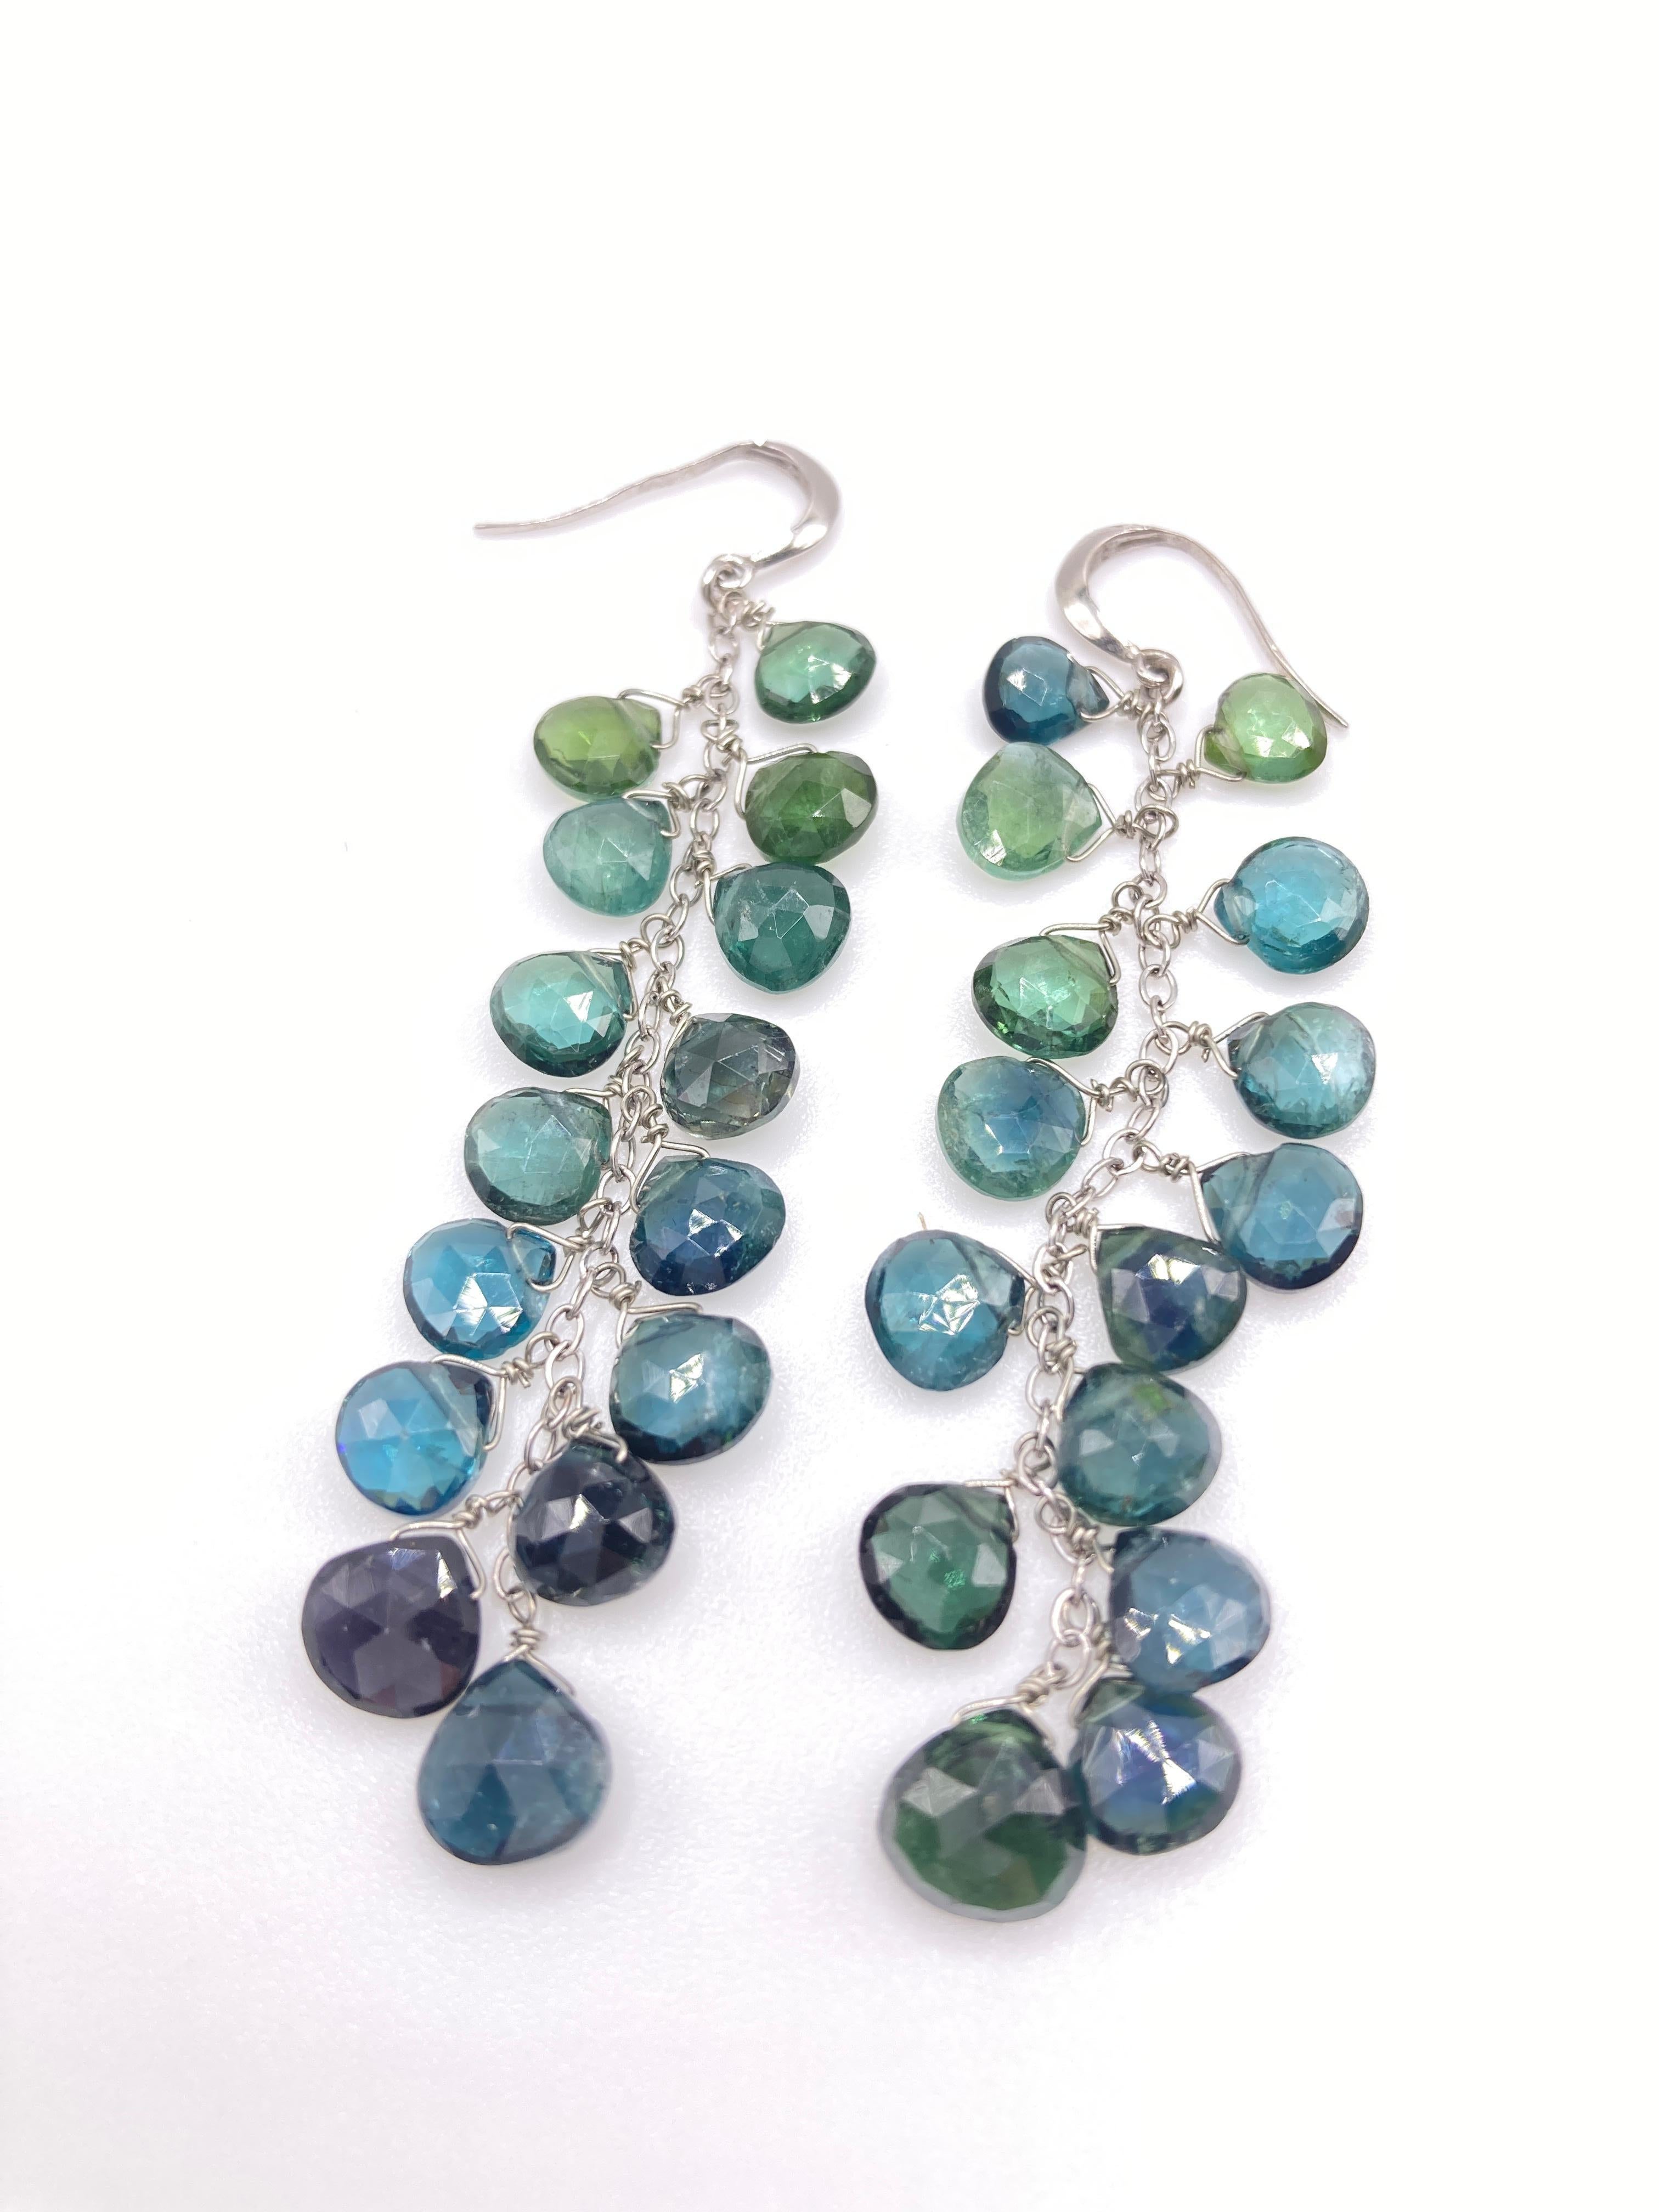 These rare indicolite cascades down from a light greenish blue to a deep blue. Very light although 2,3/4 long, you can't feel them on and won't pull down your ear lobe. They come with a safety rubber end. Also available in pink tourmaline, green